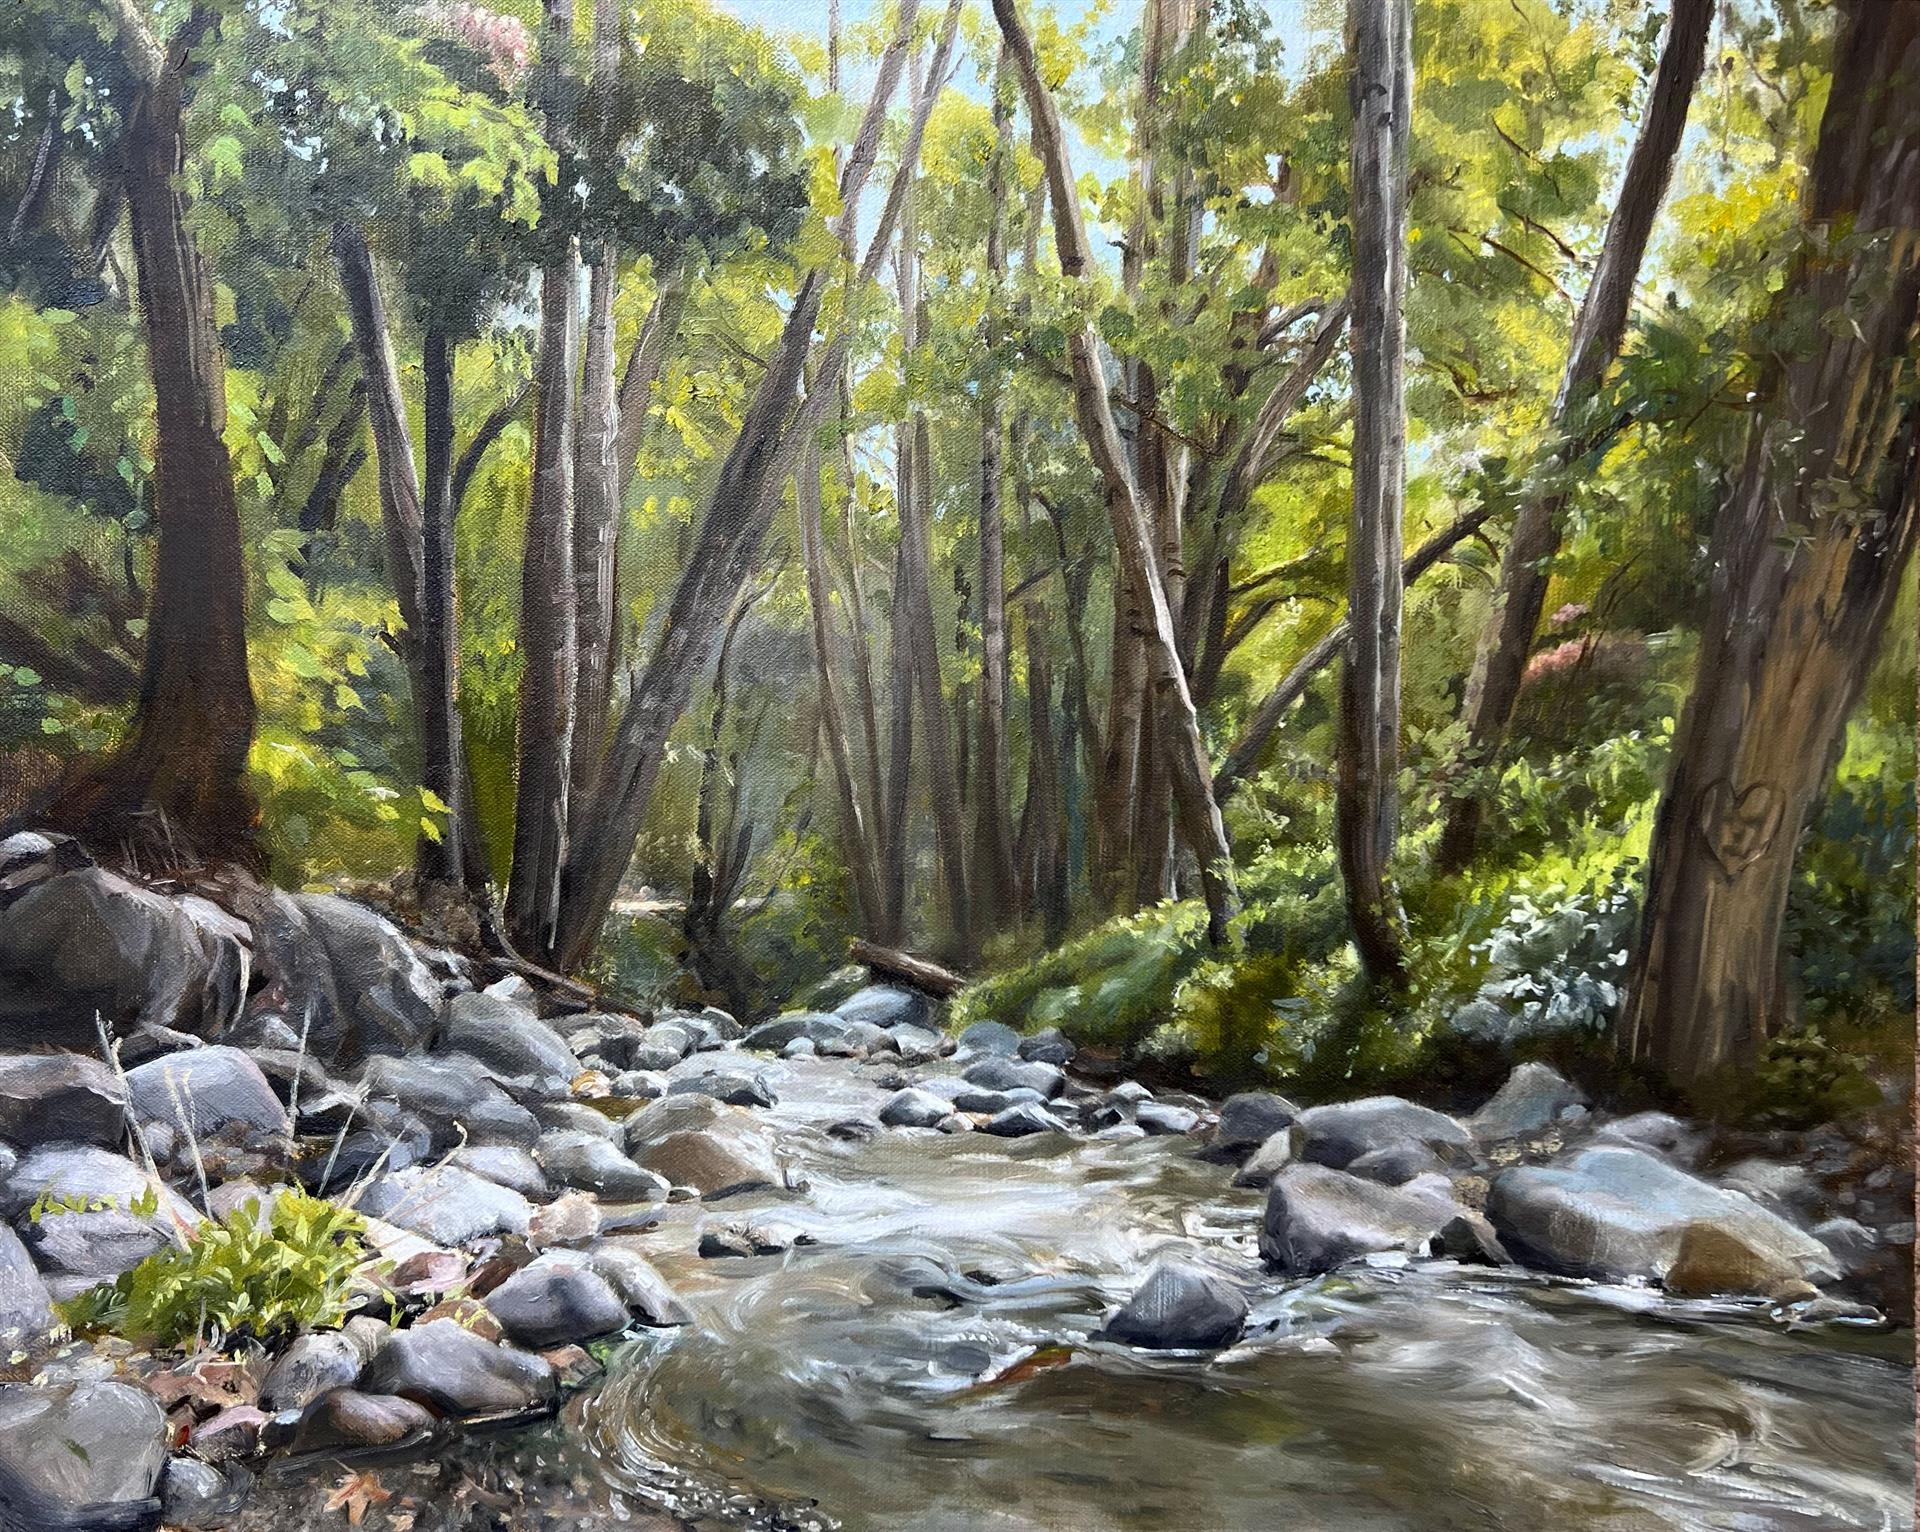 Tamara Smith, “Angeles Forest,” Oil on canvas, 16 x 20 inches, Collection of the Artist